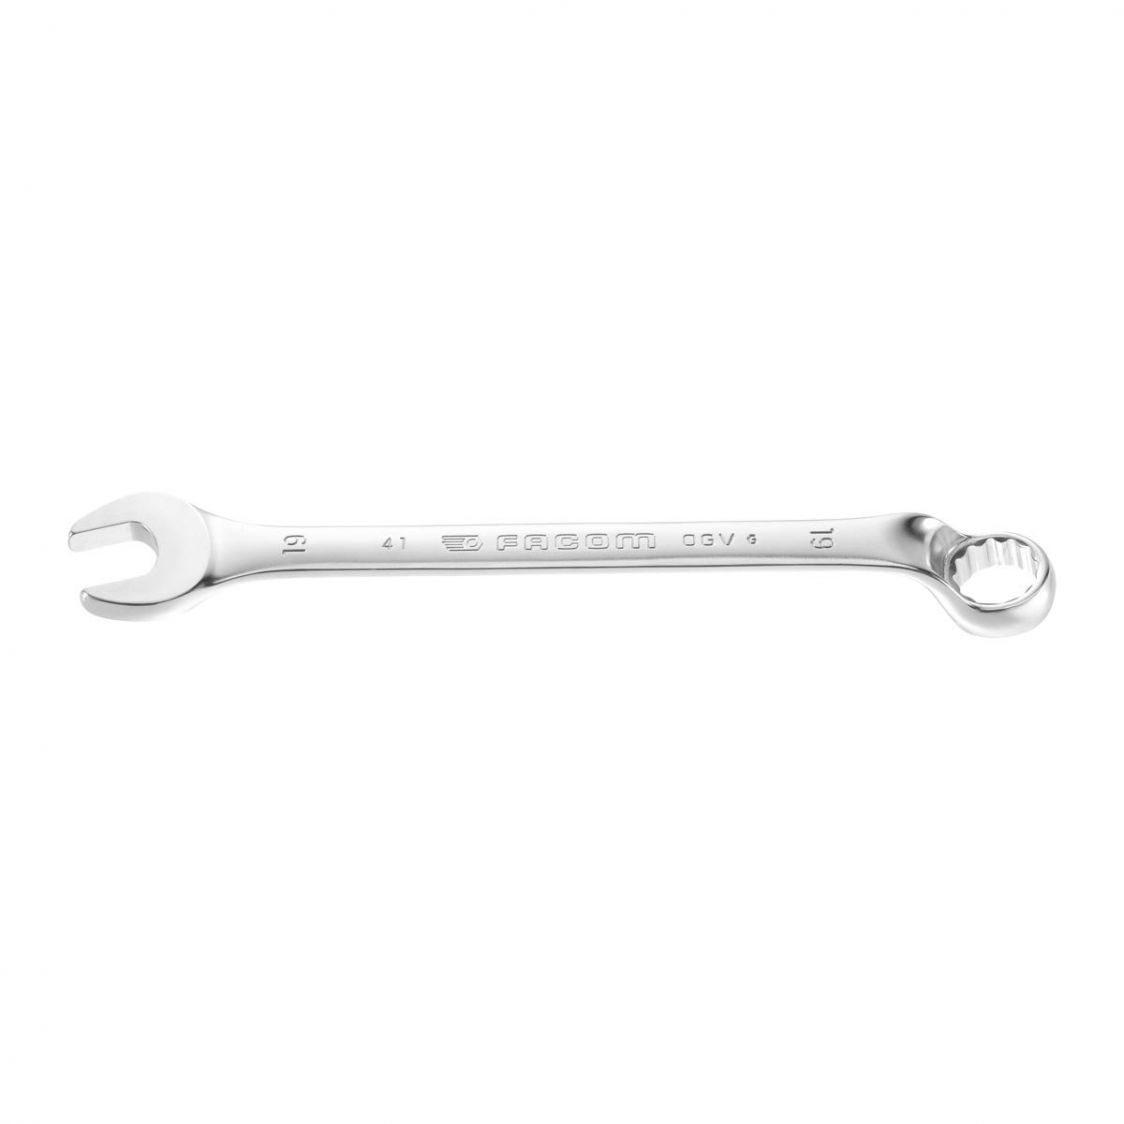 FACOM 41.7 - 7mm Metric Offset Combination Spanner